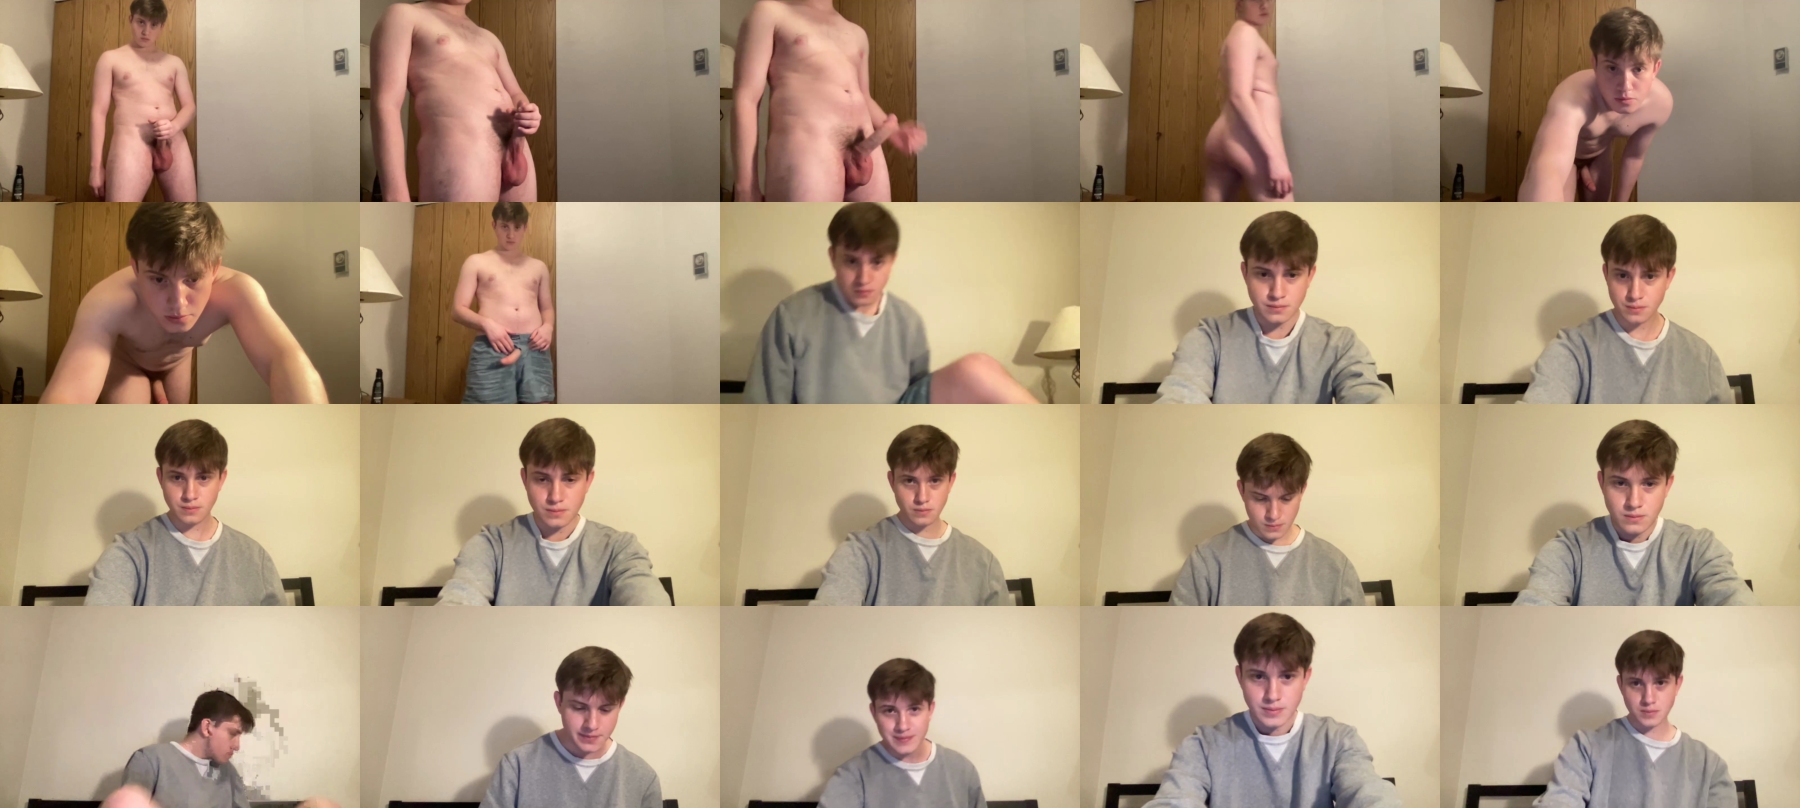 999versace Nude CAM SHOW @ Chaturbate 06-11-2021